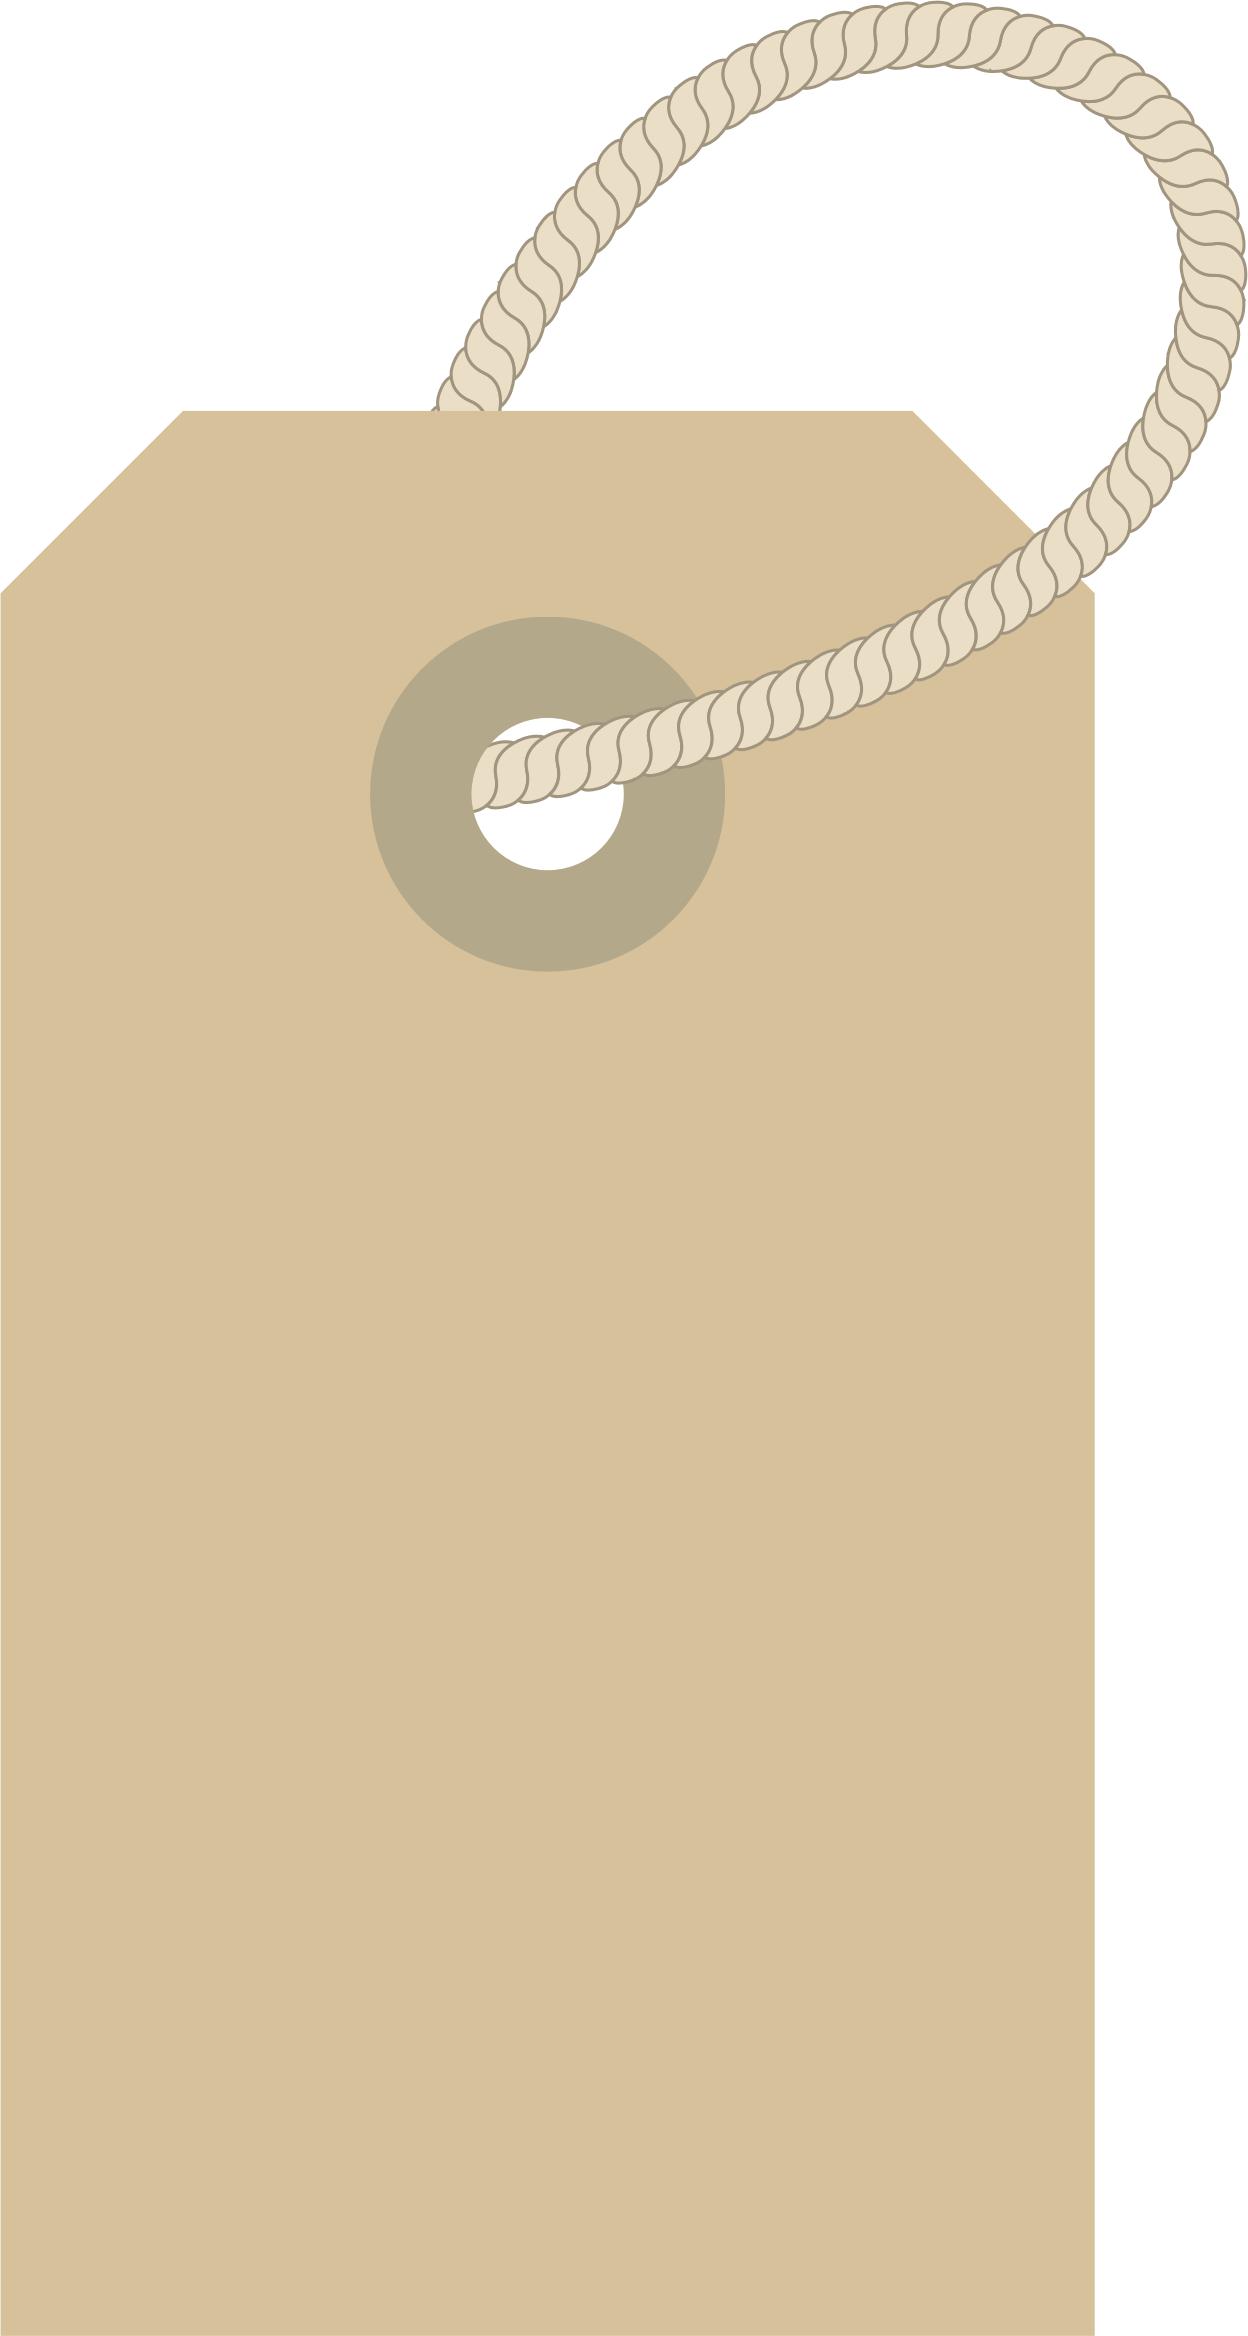 Clothing Label with Rope png